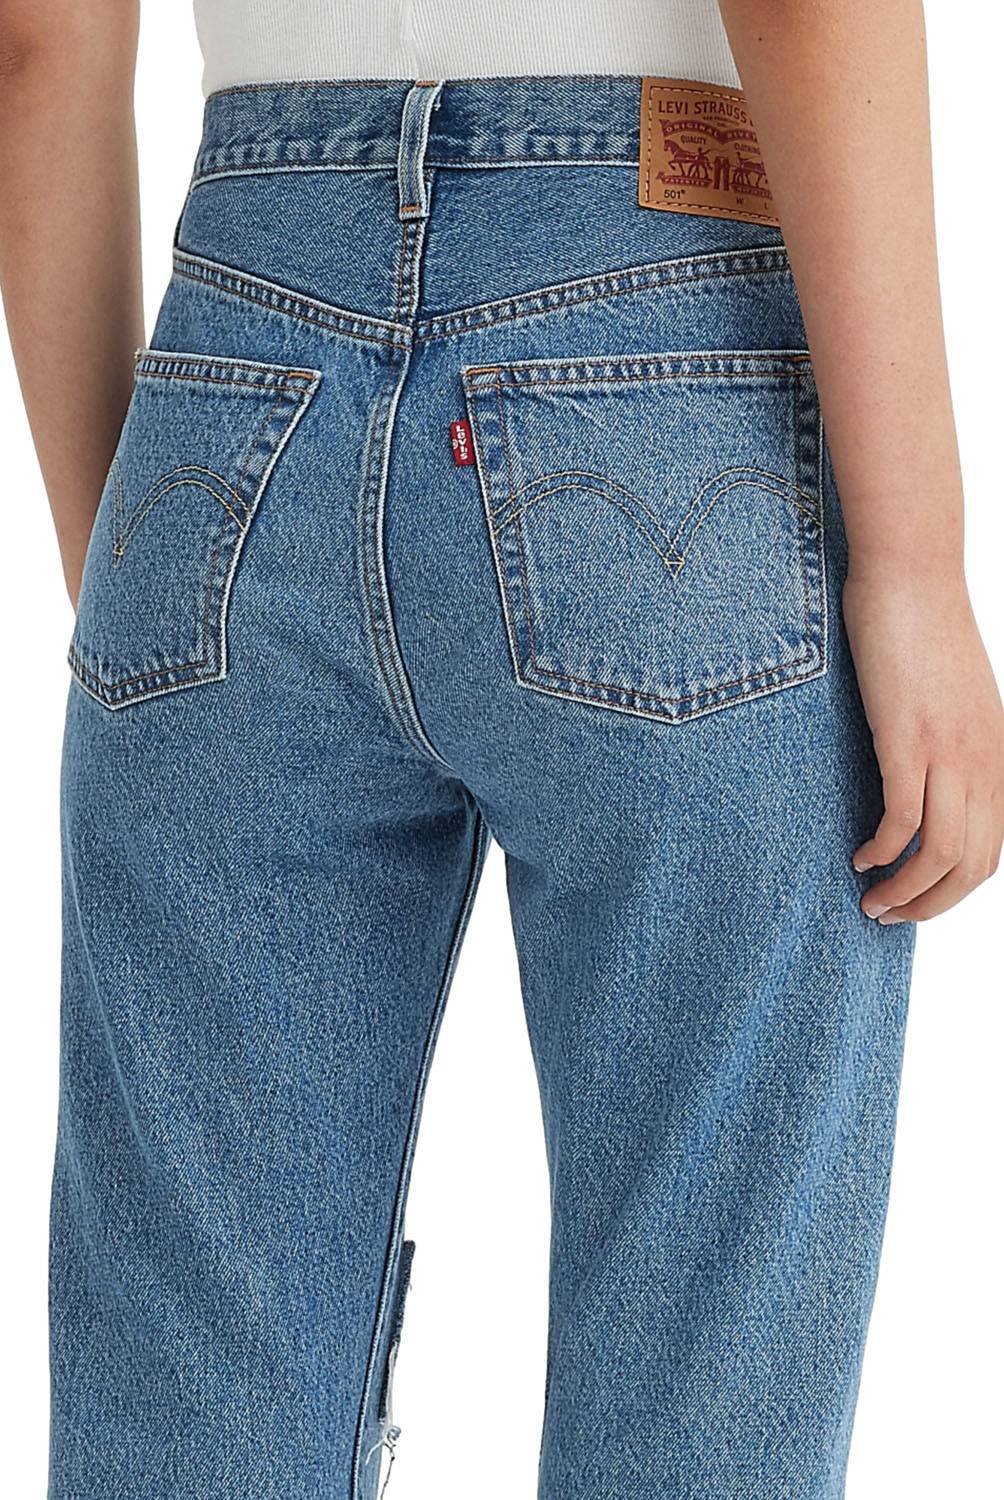 Jeans Levis Mujer  MercadoLibre 📦